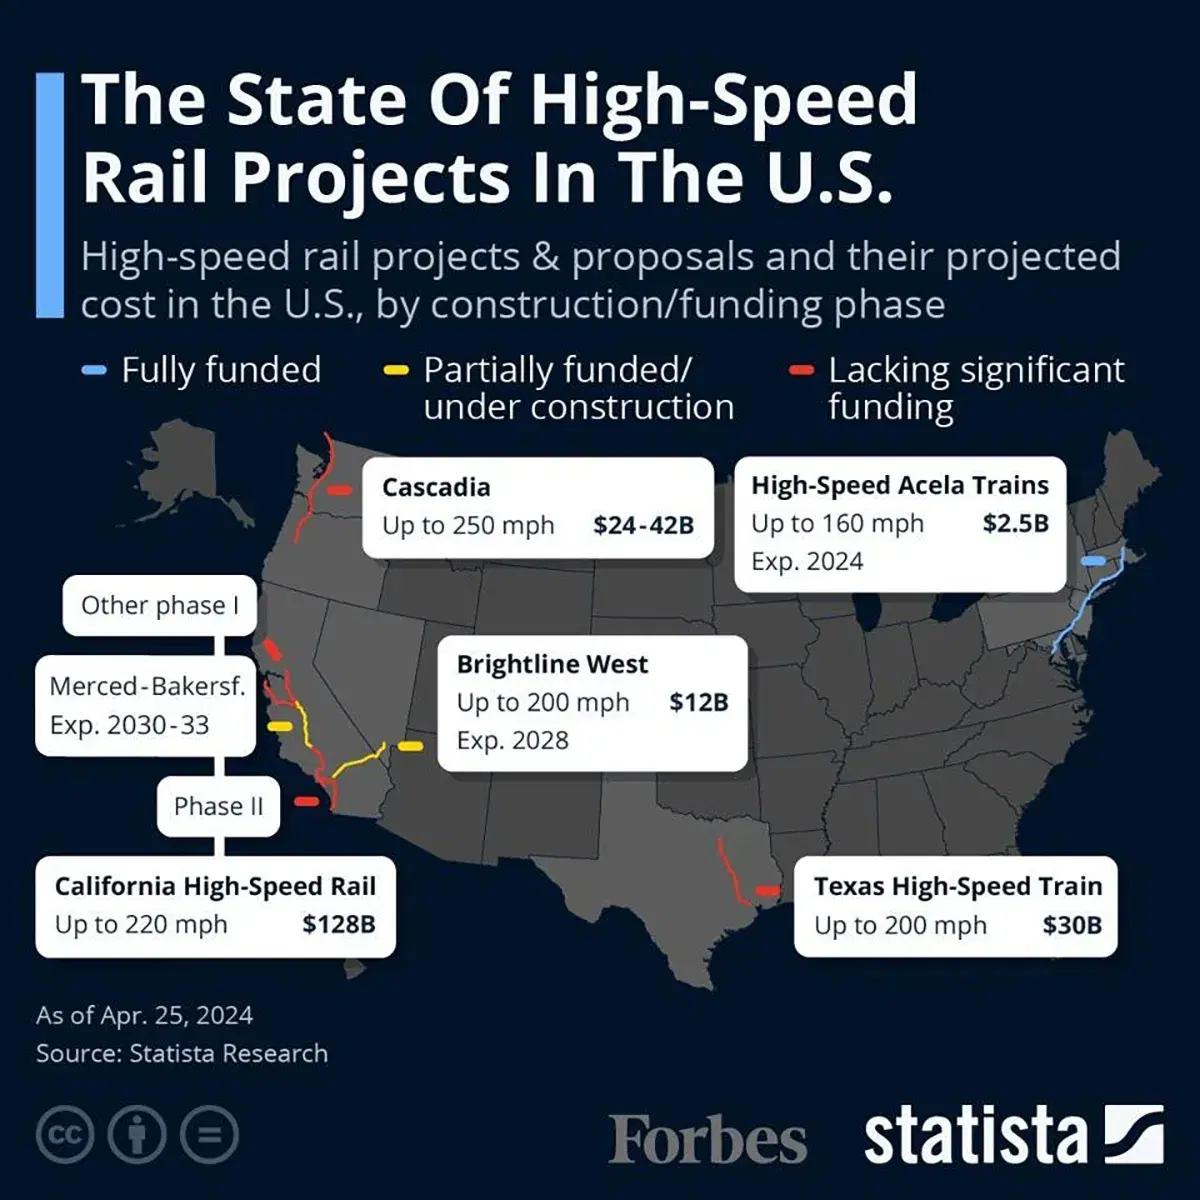 The State Of High-Speed Rail Projects In The U.S.